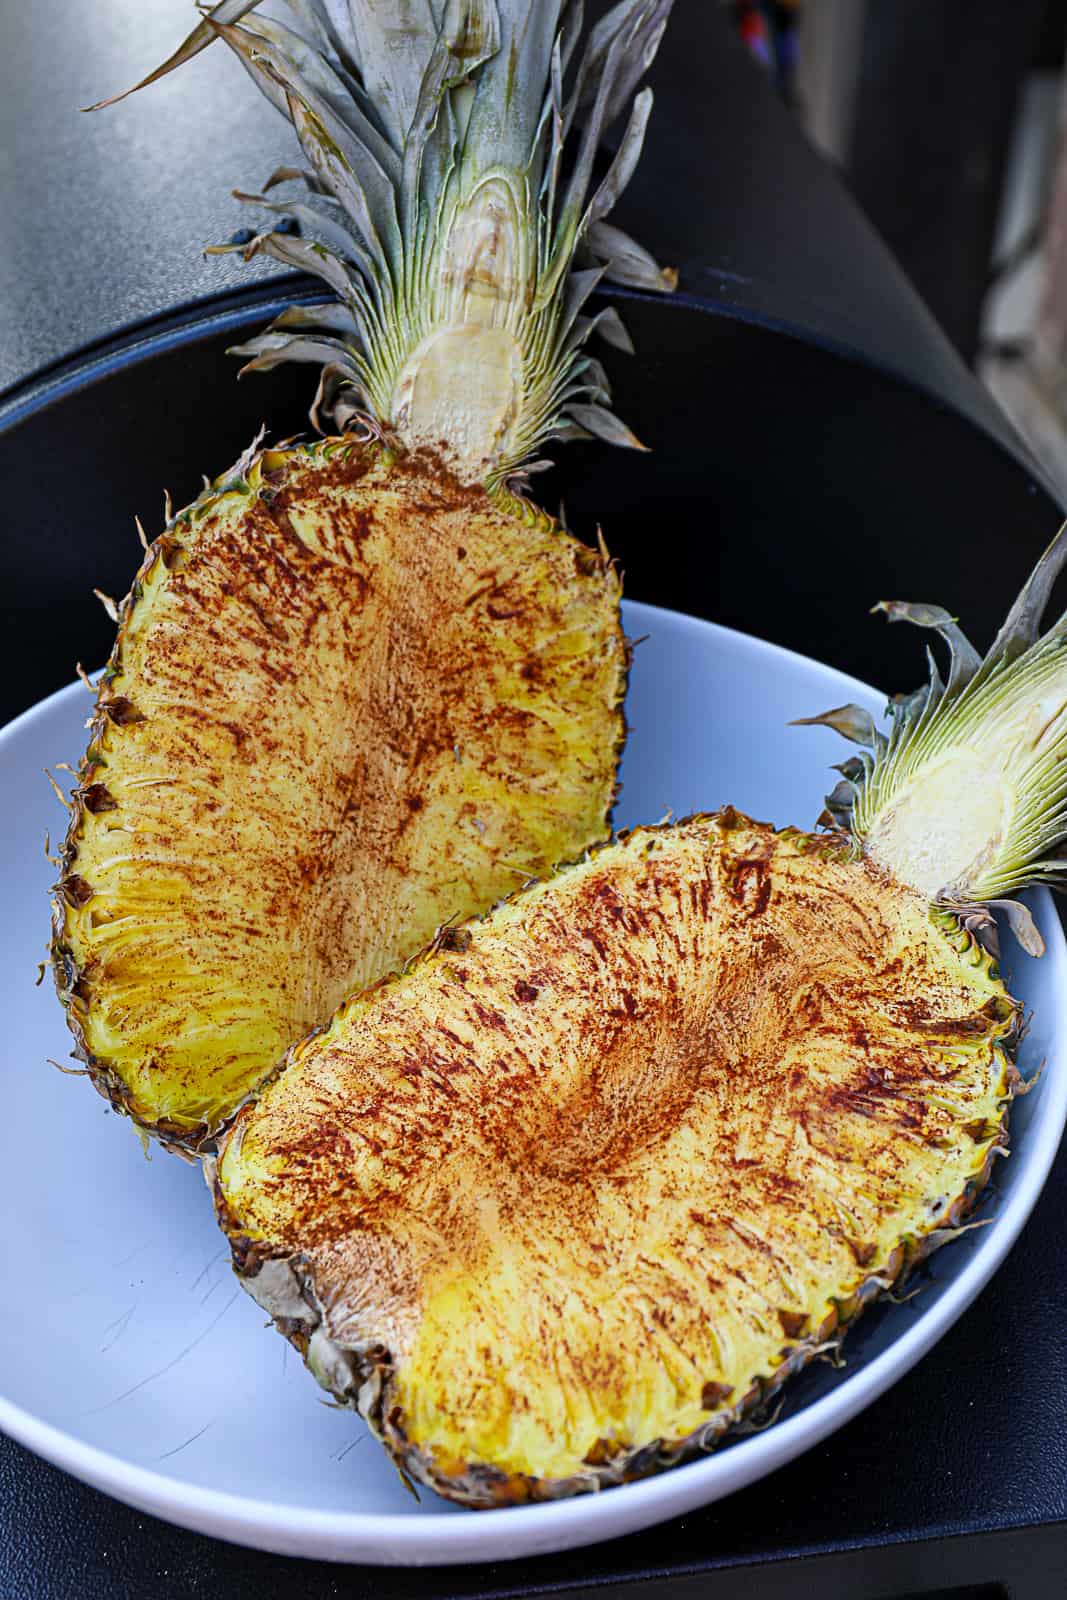 Traeger Grills With Smoked Pineapple In Party Dish Bowl